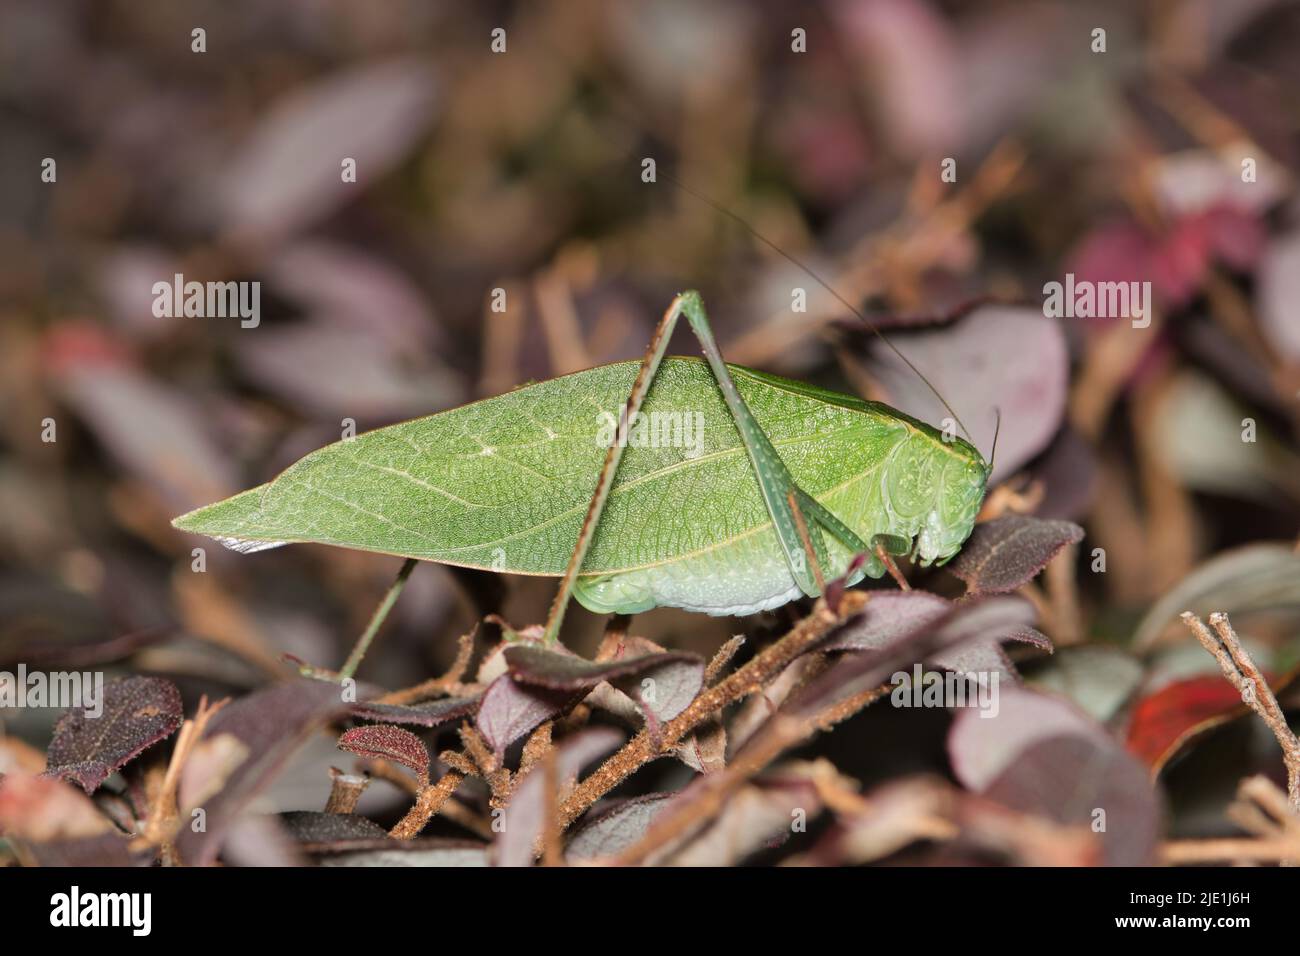 Adult Katydid (Microcentrum) perched on a Loropetalum shrub, ventral view. Common species of insect found throughout North America. Stock Photo